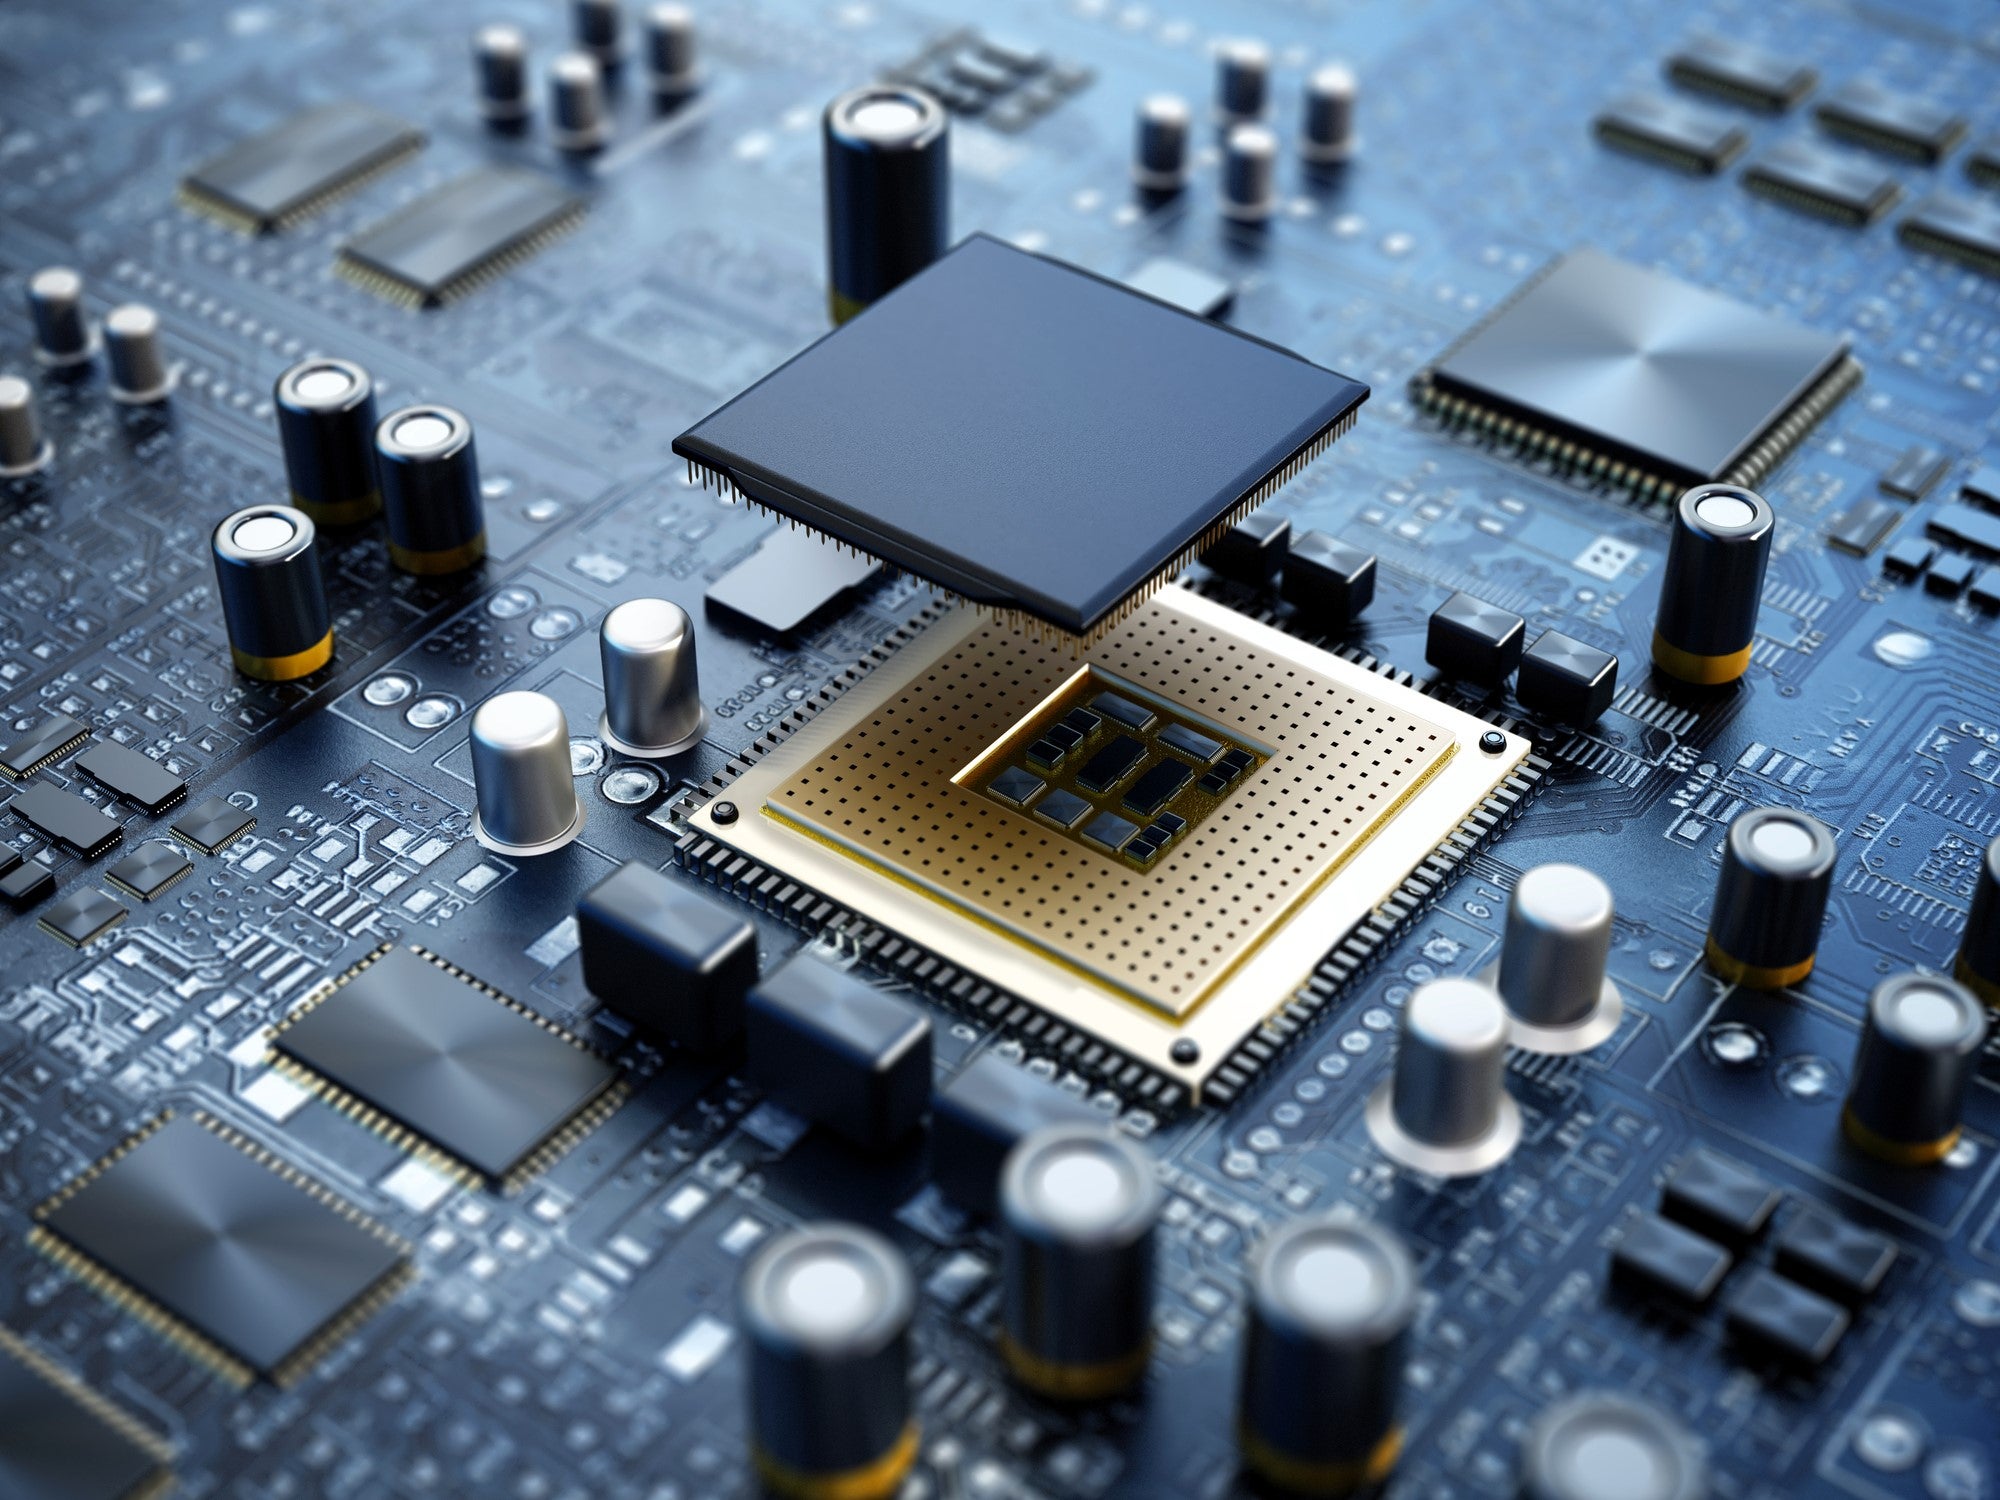 <p>Chinese researchers claim their RISC-V 32IA artificial intelligence was able to design a working computer processing unit (CPU) in just five hours</p>